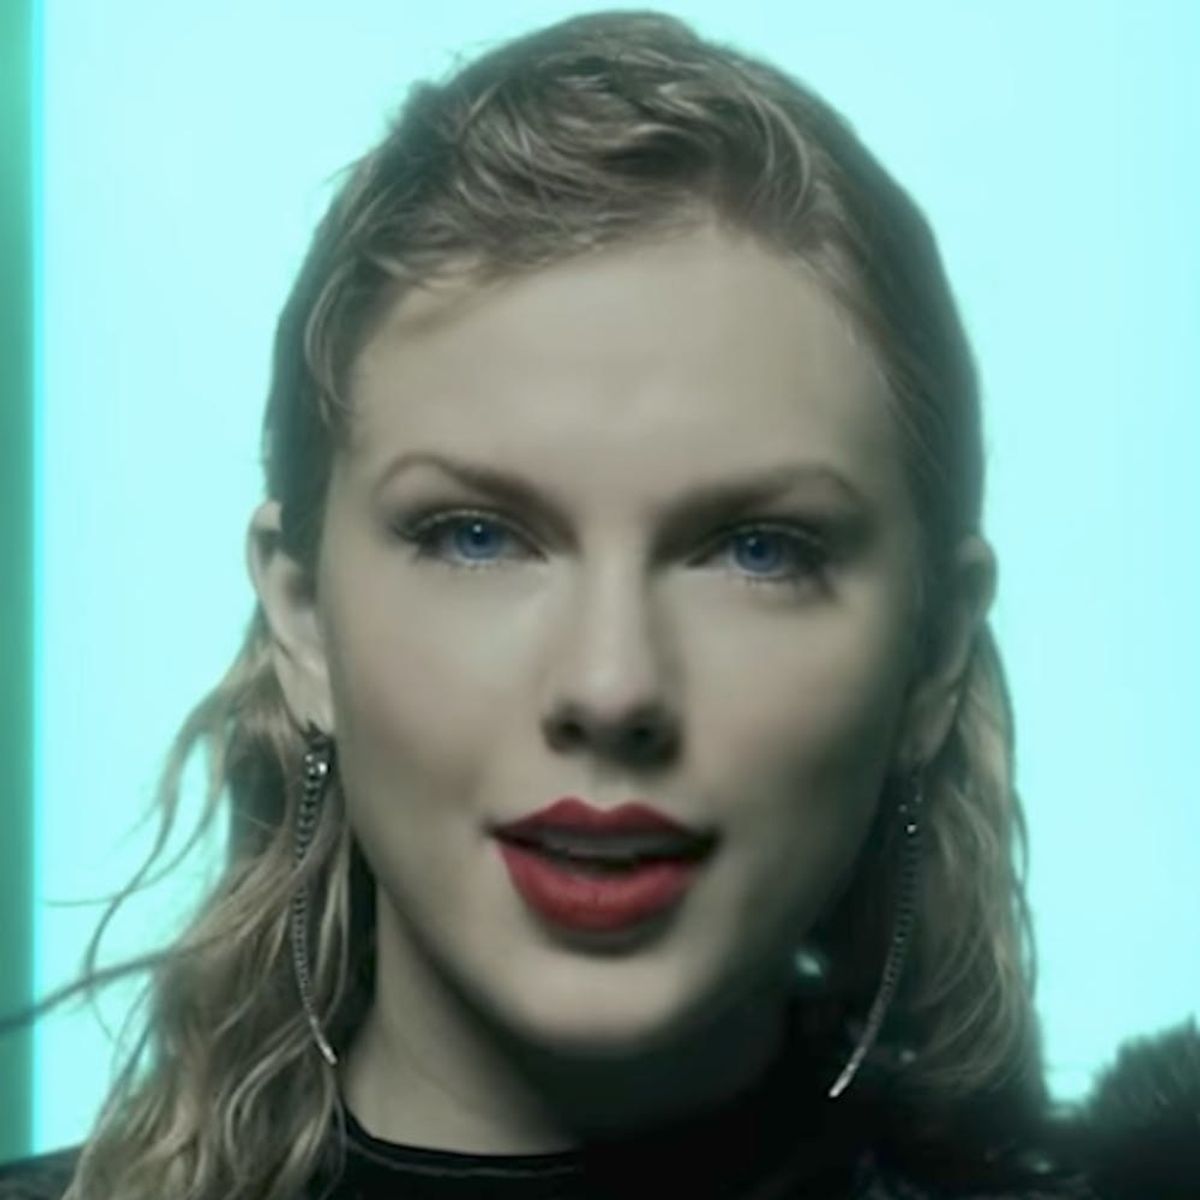 A Closer Look at Every Element of Taylor Swift’s New Look